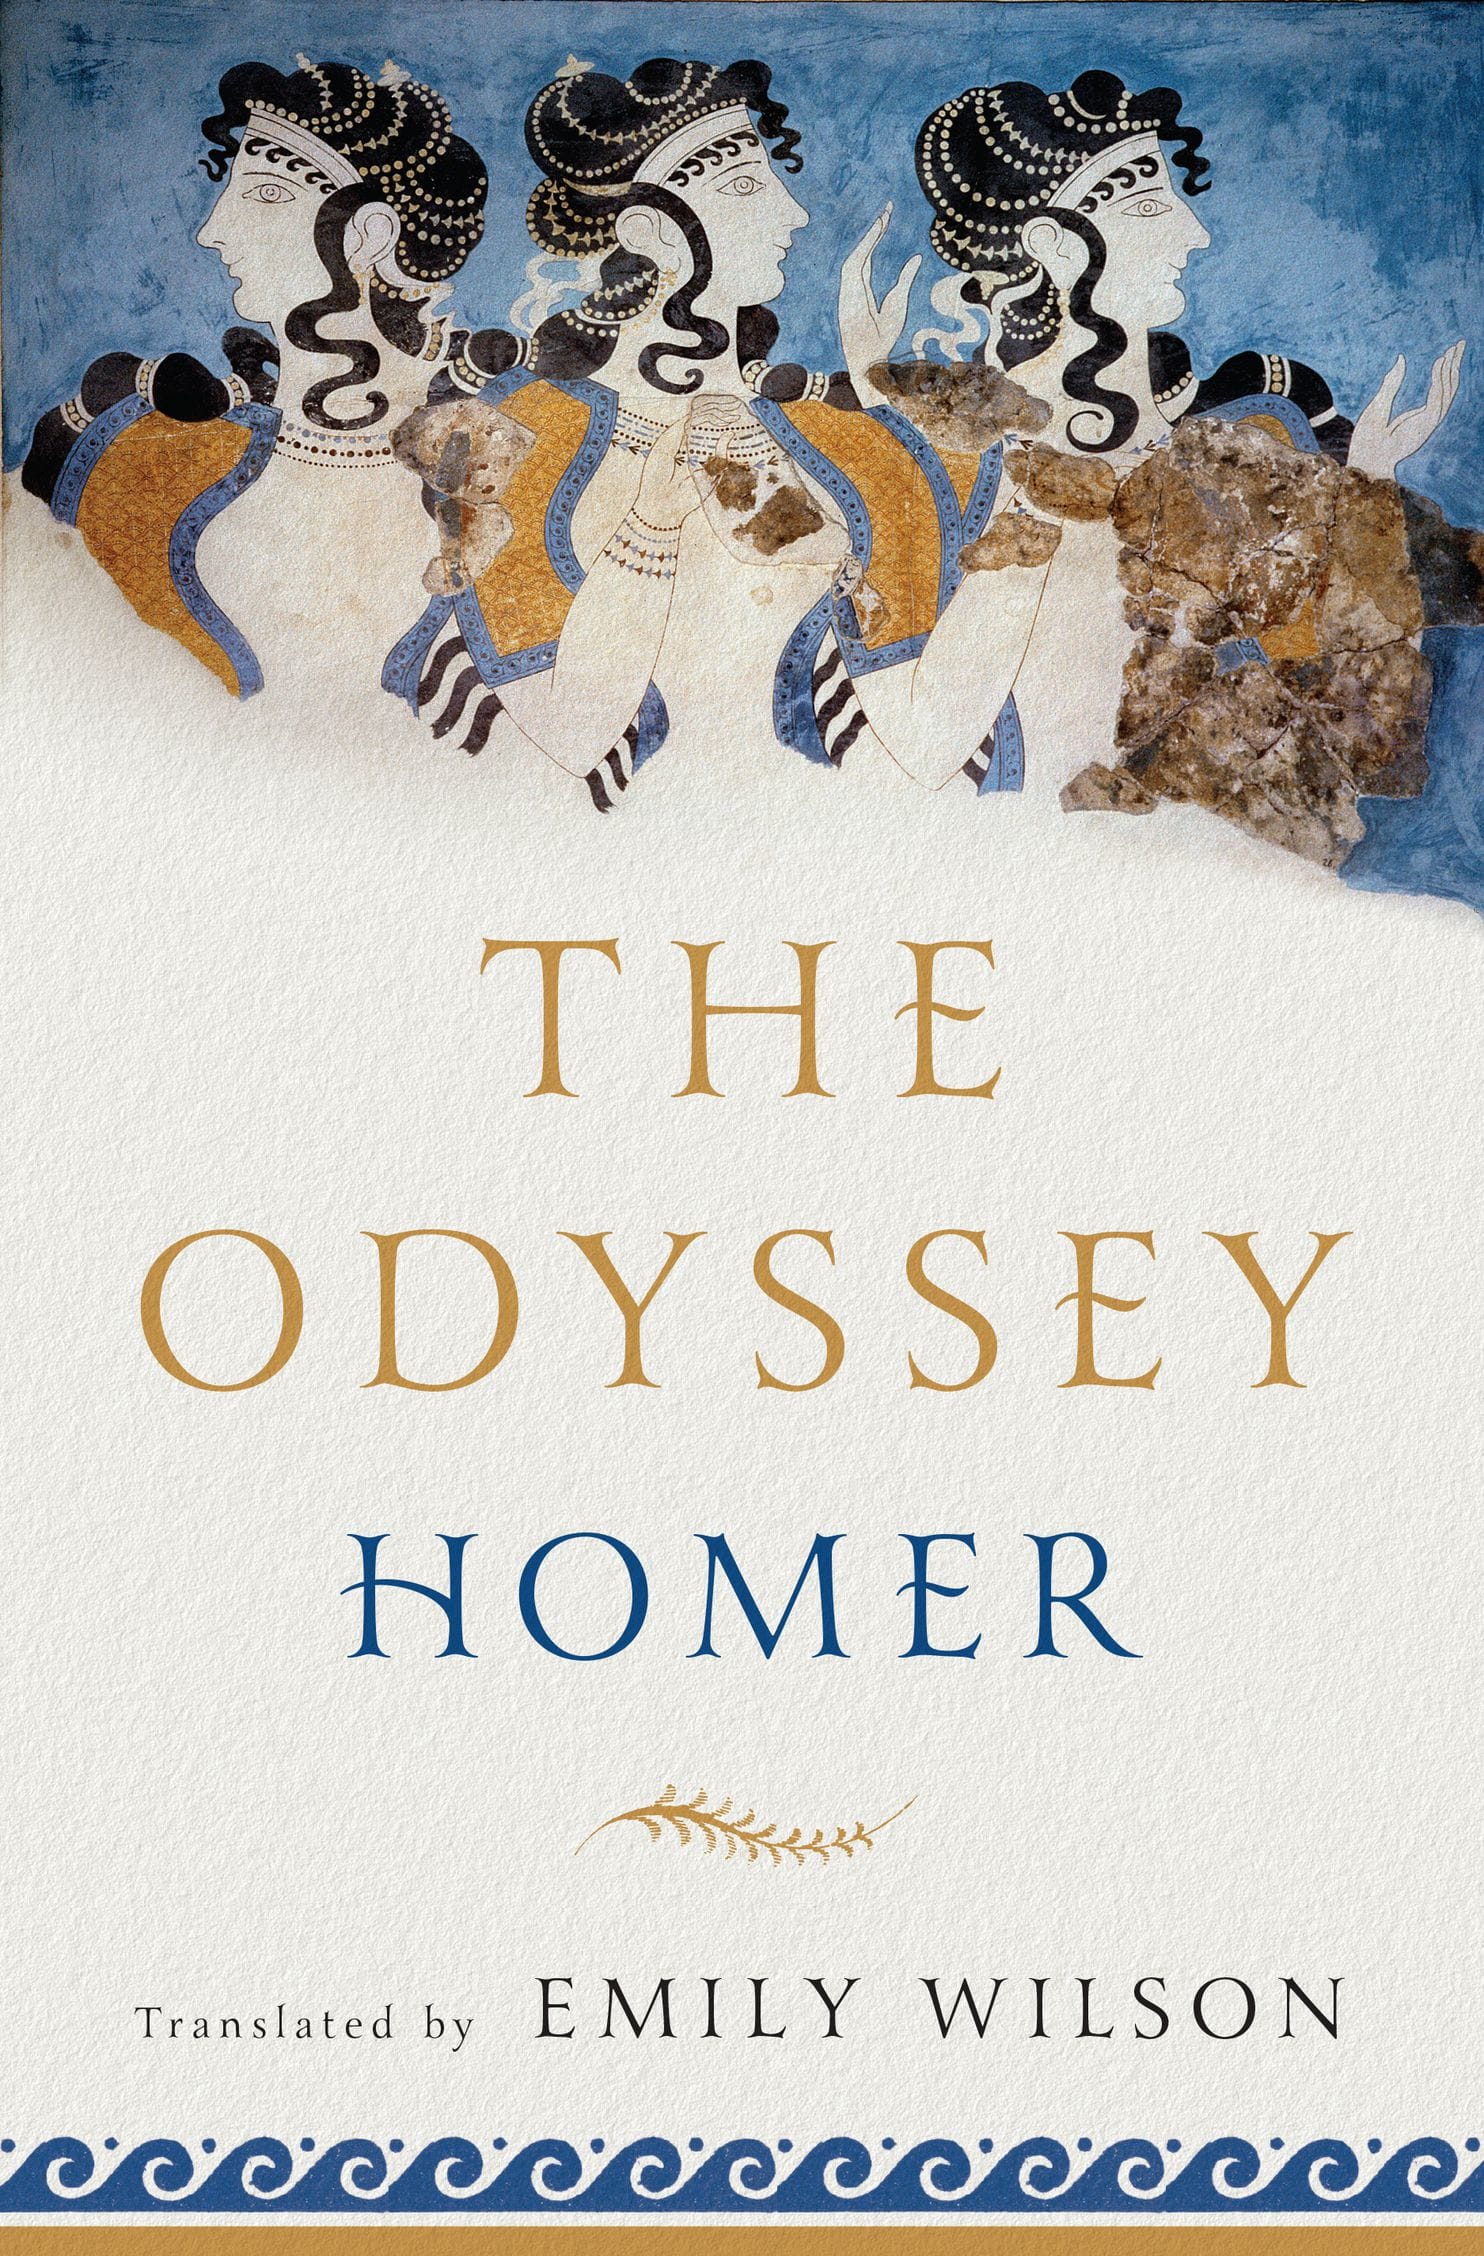 Odyssey translated by Emily Wilson by Homer